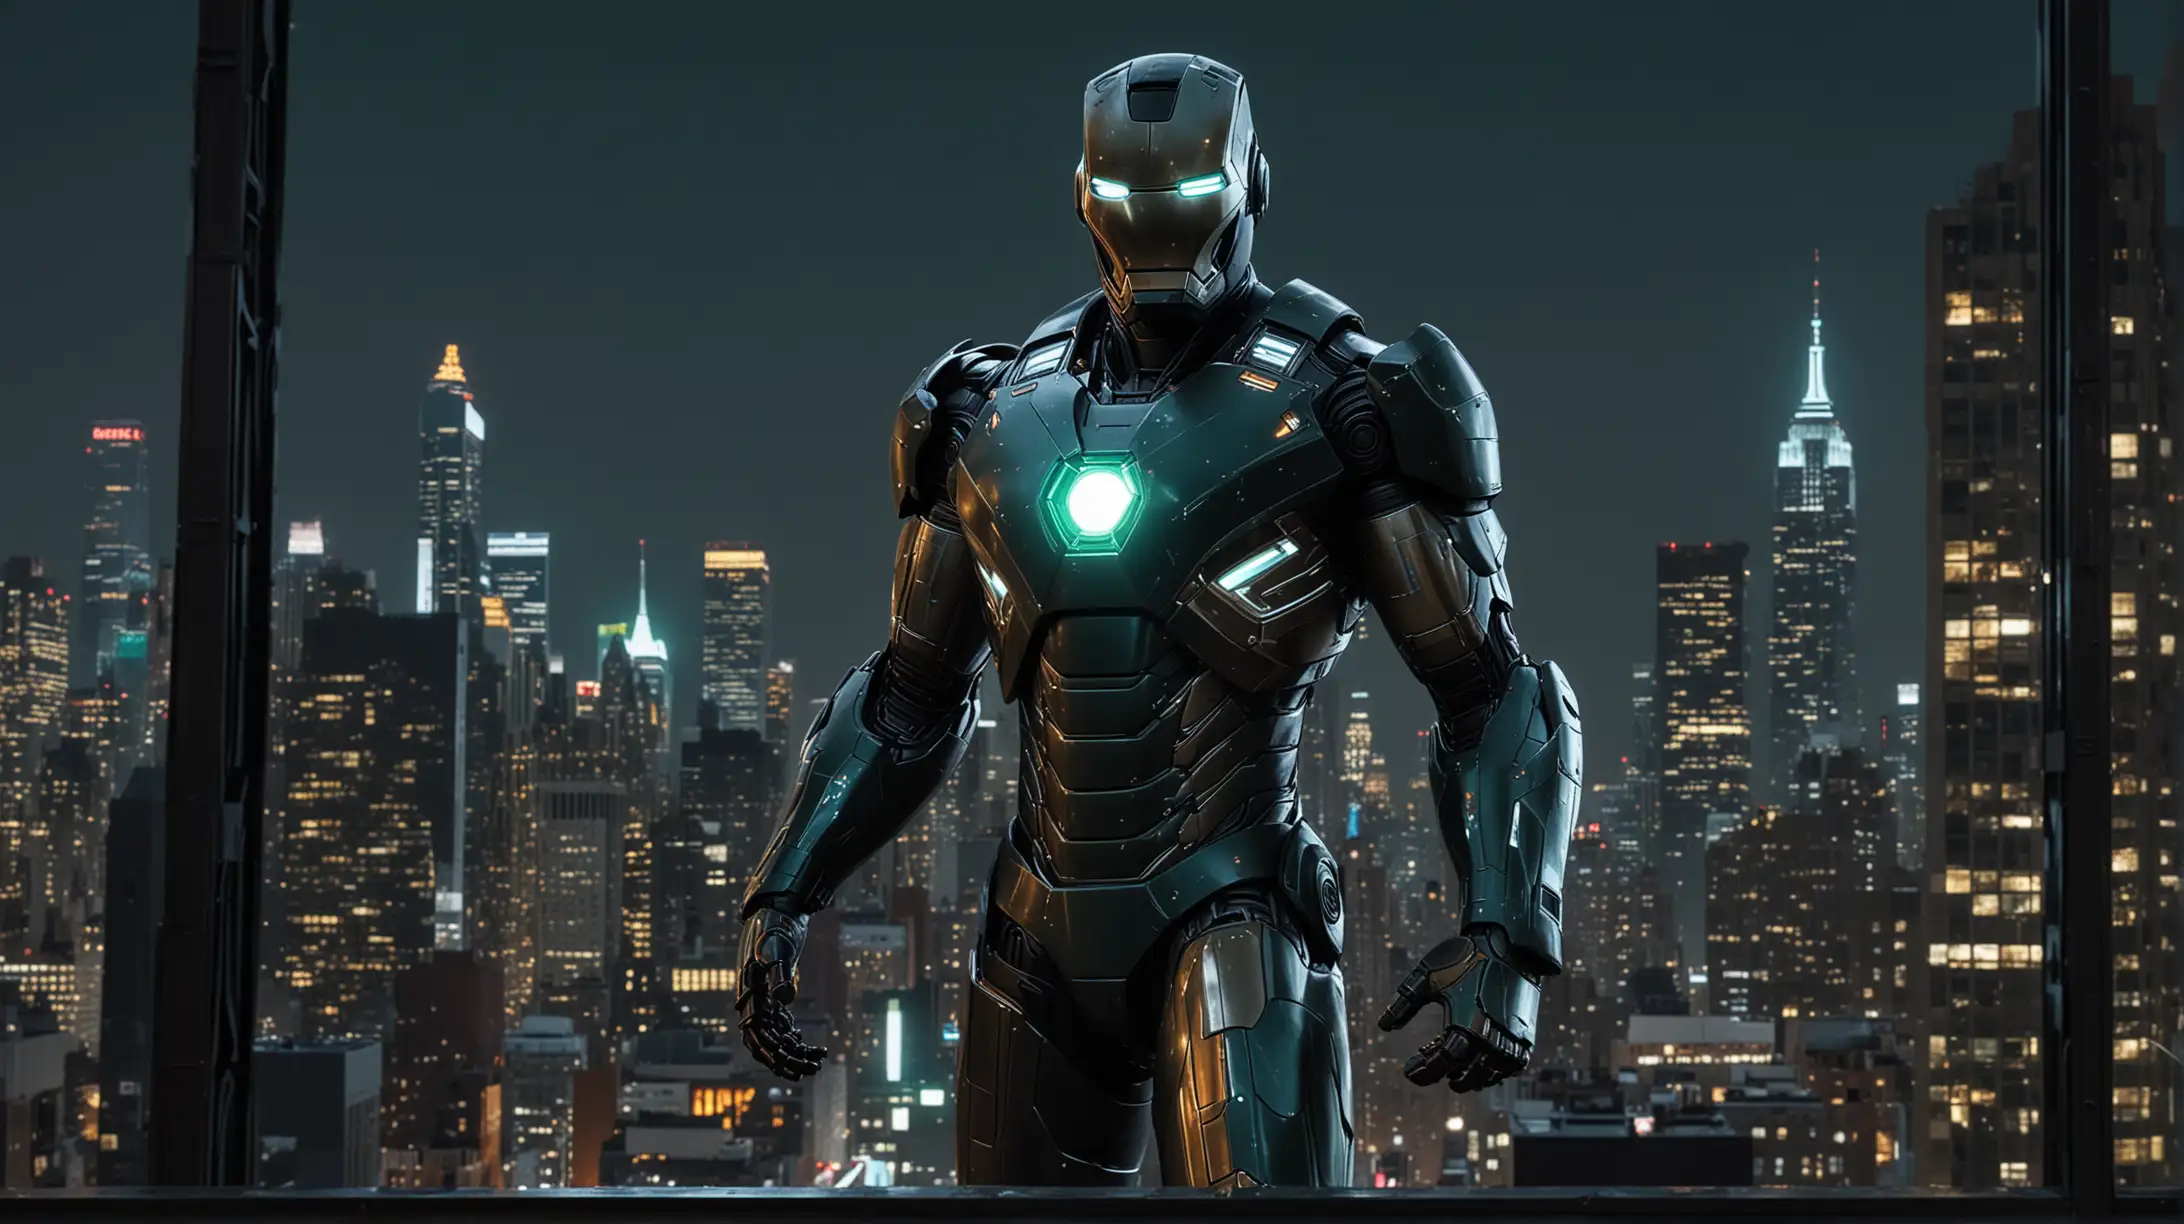 Brutalist architecture, Neon lights shining bright , futuristic New York City, at night, iron man mark 33 suit, painted black with dark green accents, with titanium silver arc reactor, flying over skyline
